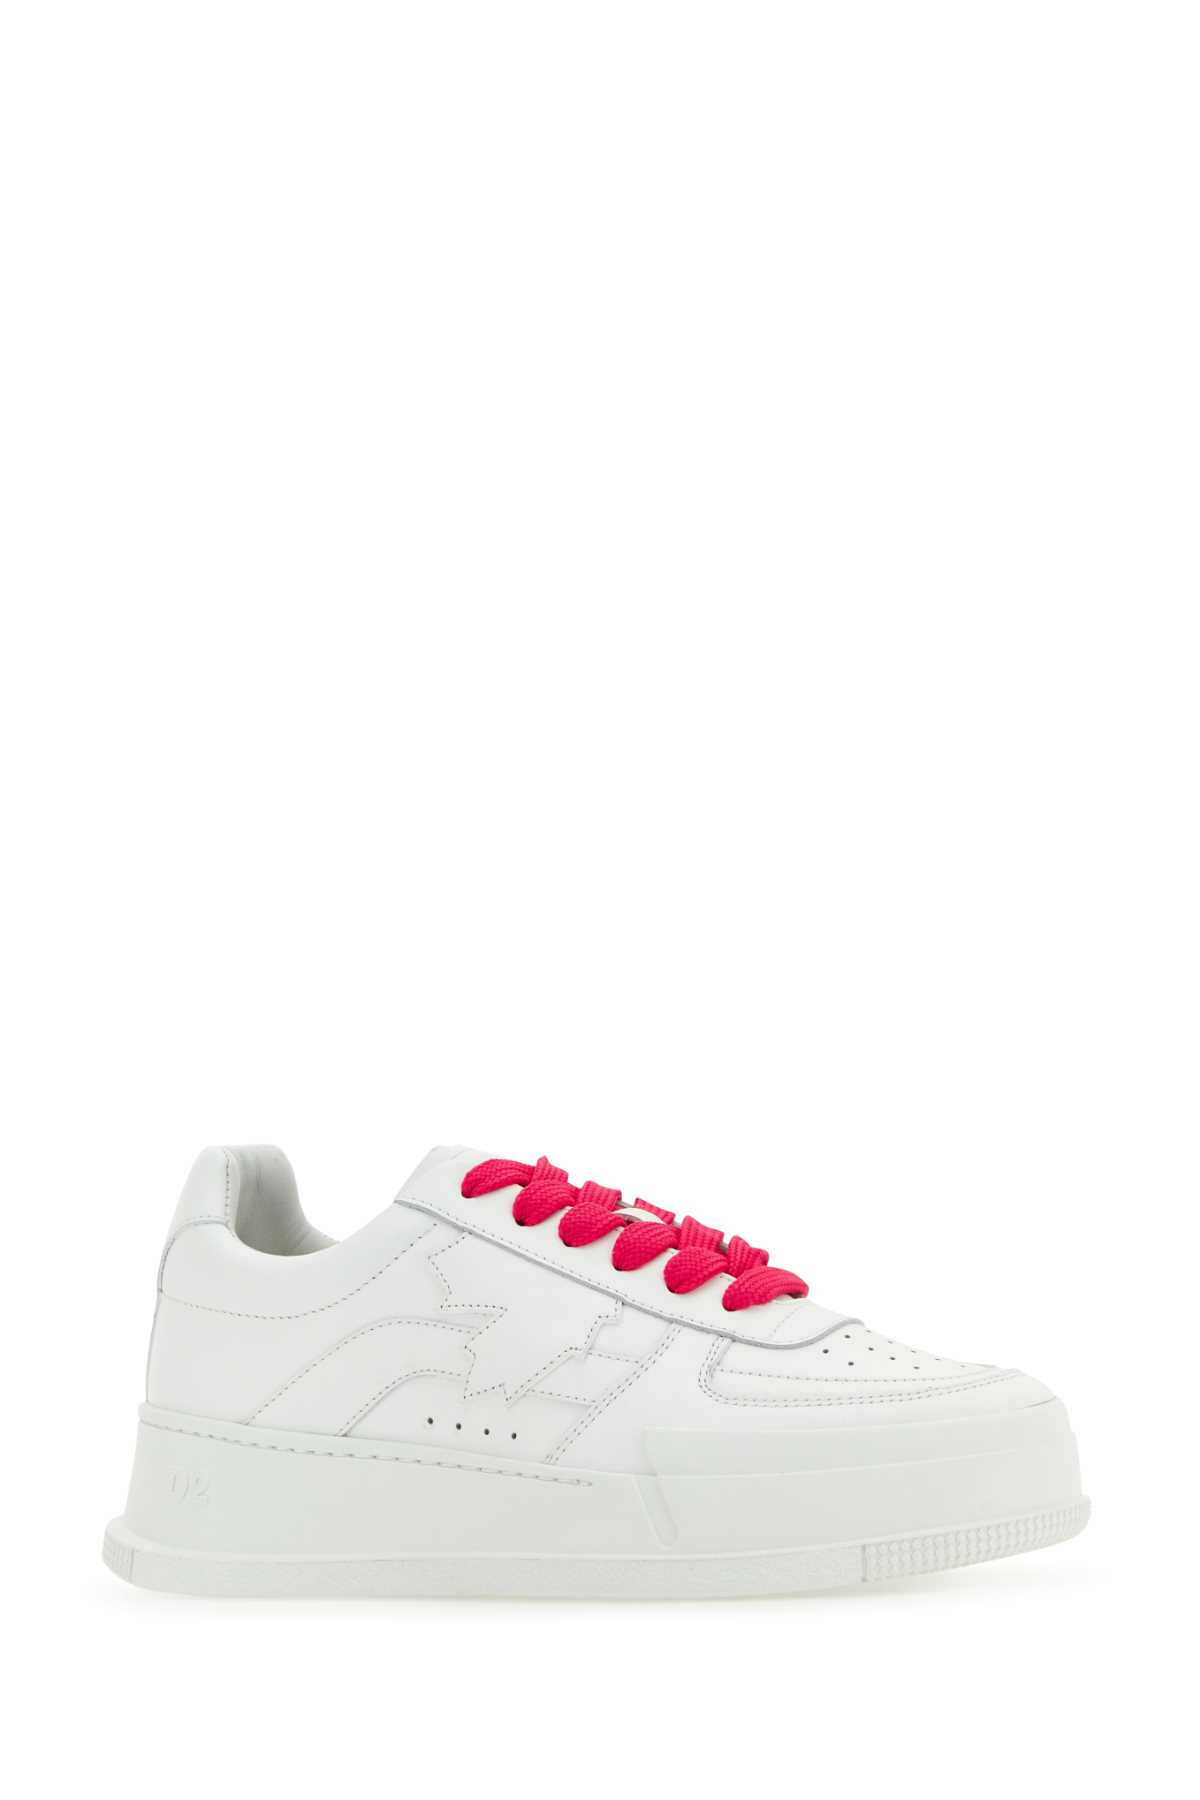 DSQUARED2 WHITE LEATHER CANADIAN SNEAKERS